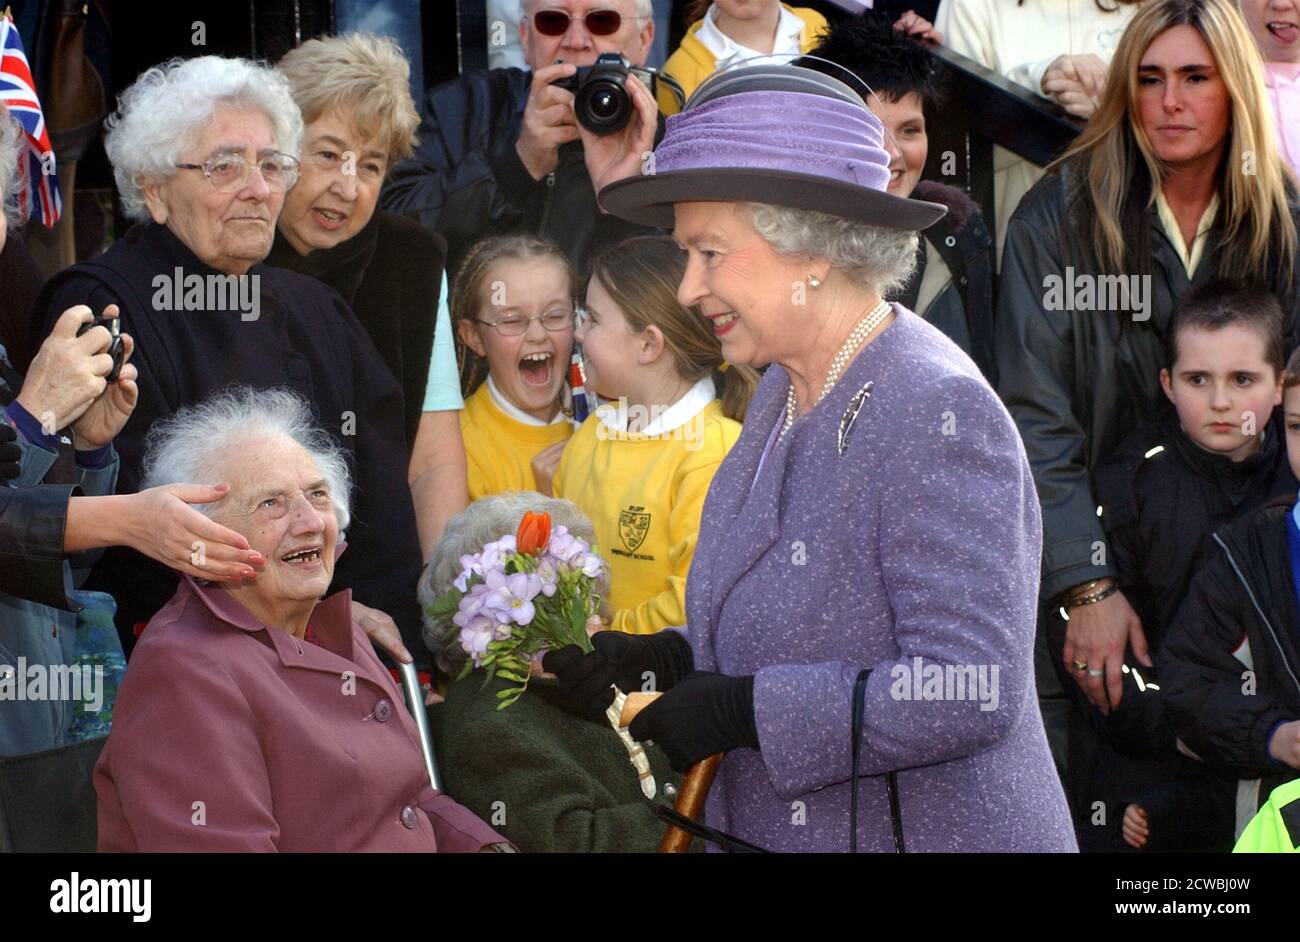 Photograph of Queen Elizabeth II during a visit to Havering. Elizabeth Alexandra Mary (1926-) Queen of the United Kingdom and the other Commonwealth realm. Stock Photo